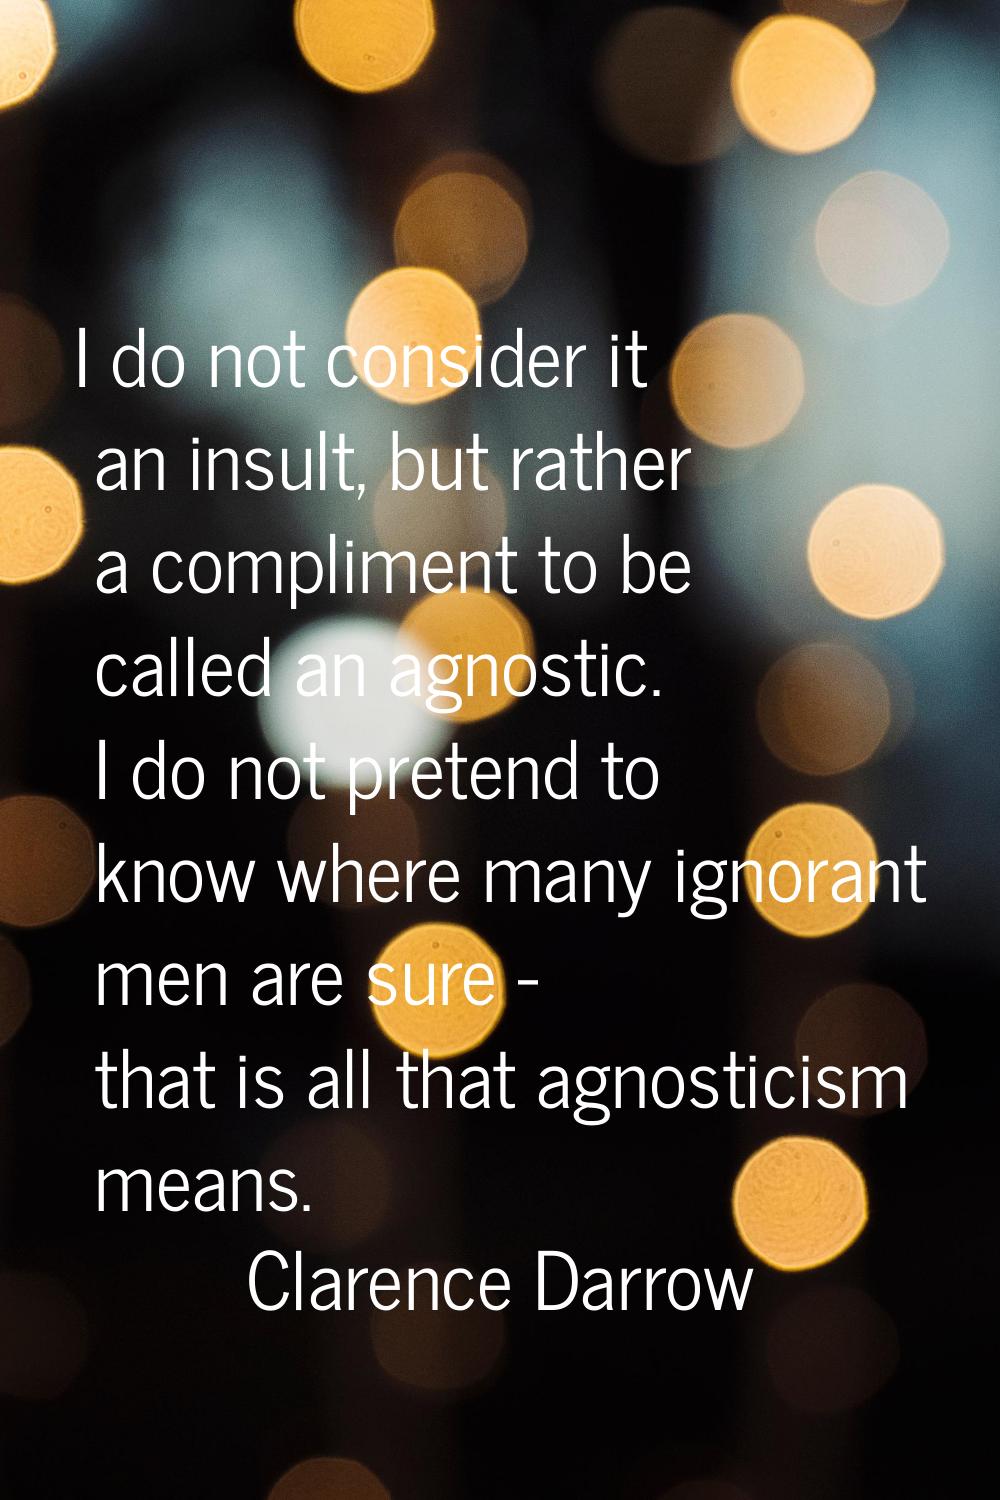 I do not consider it an insult, but rather a compliment to be called an agnostic. I do not pretend 